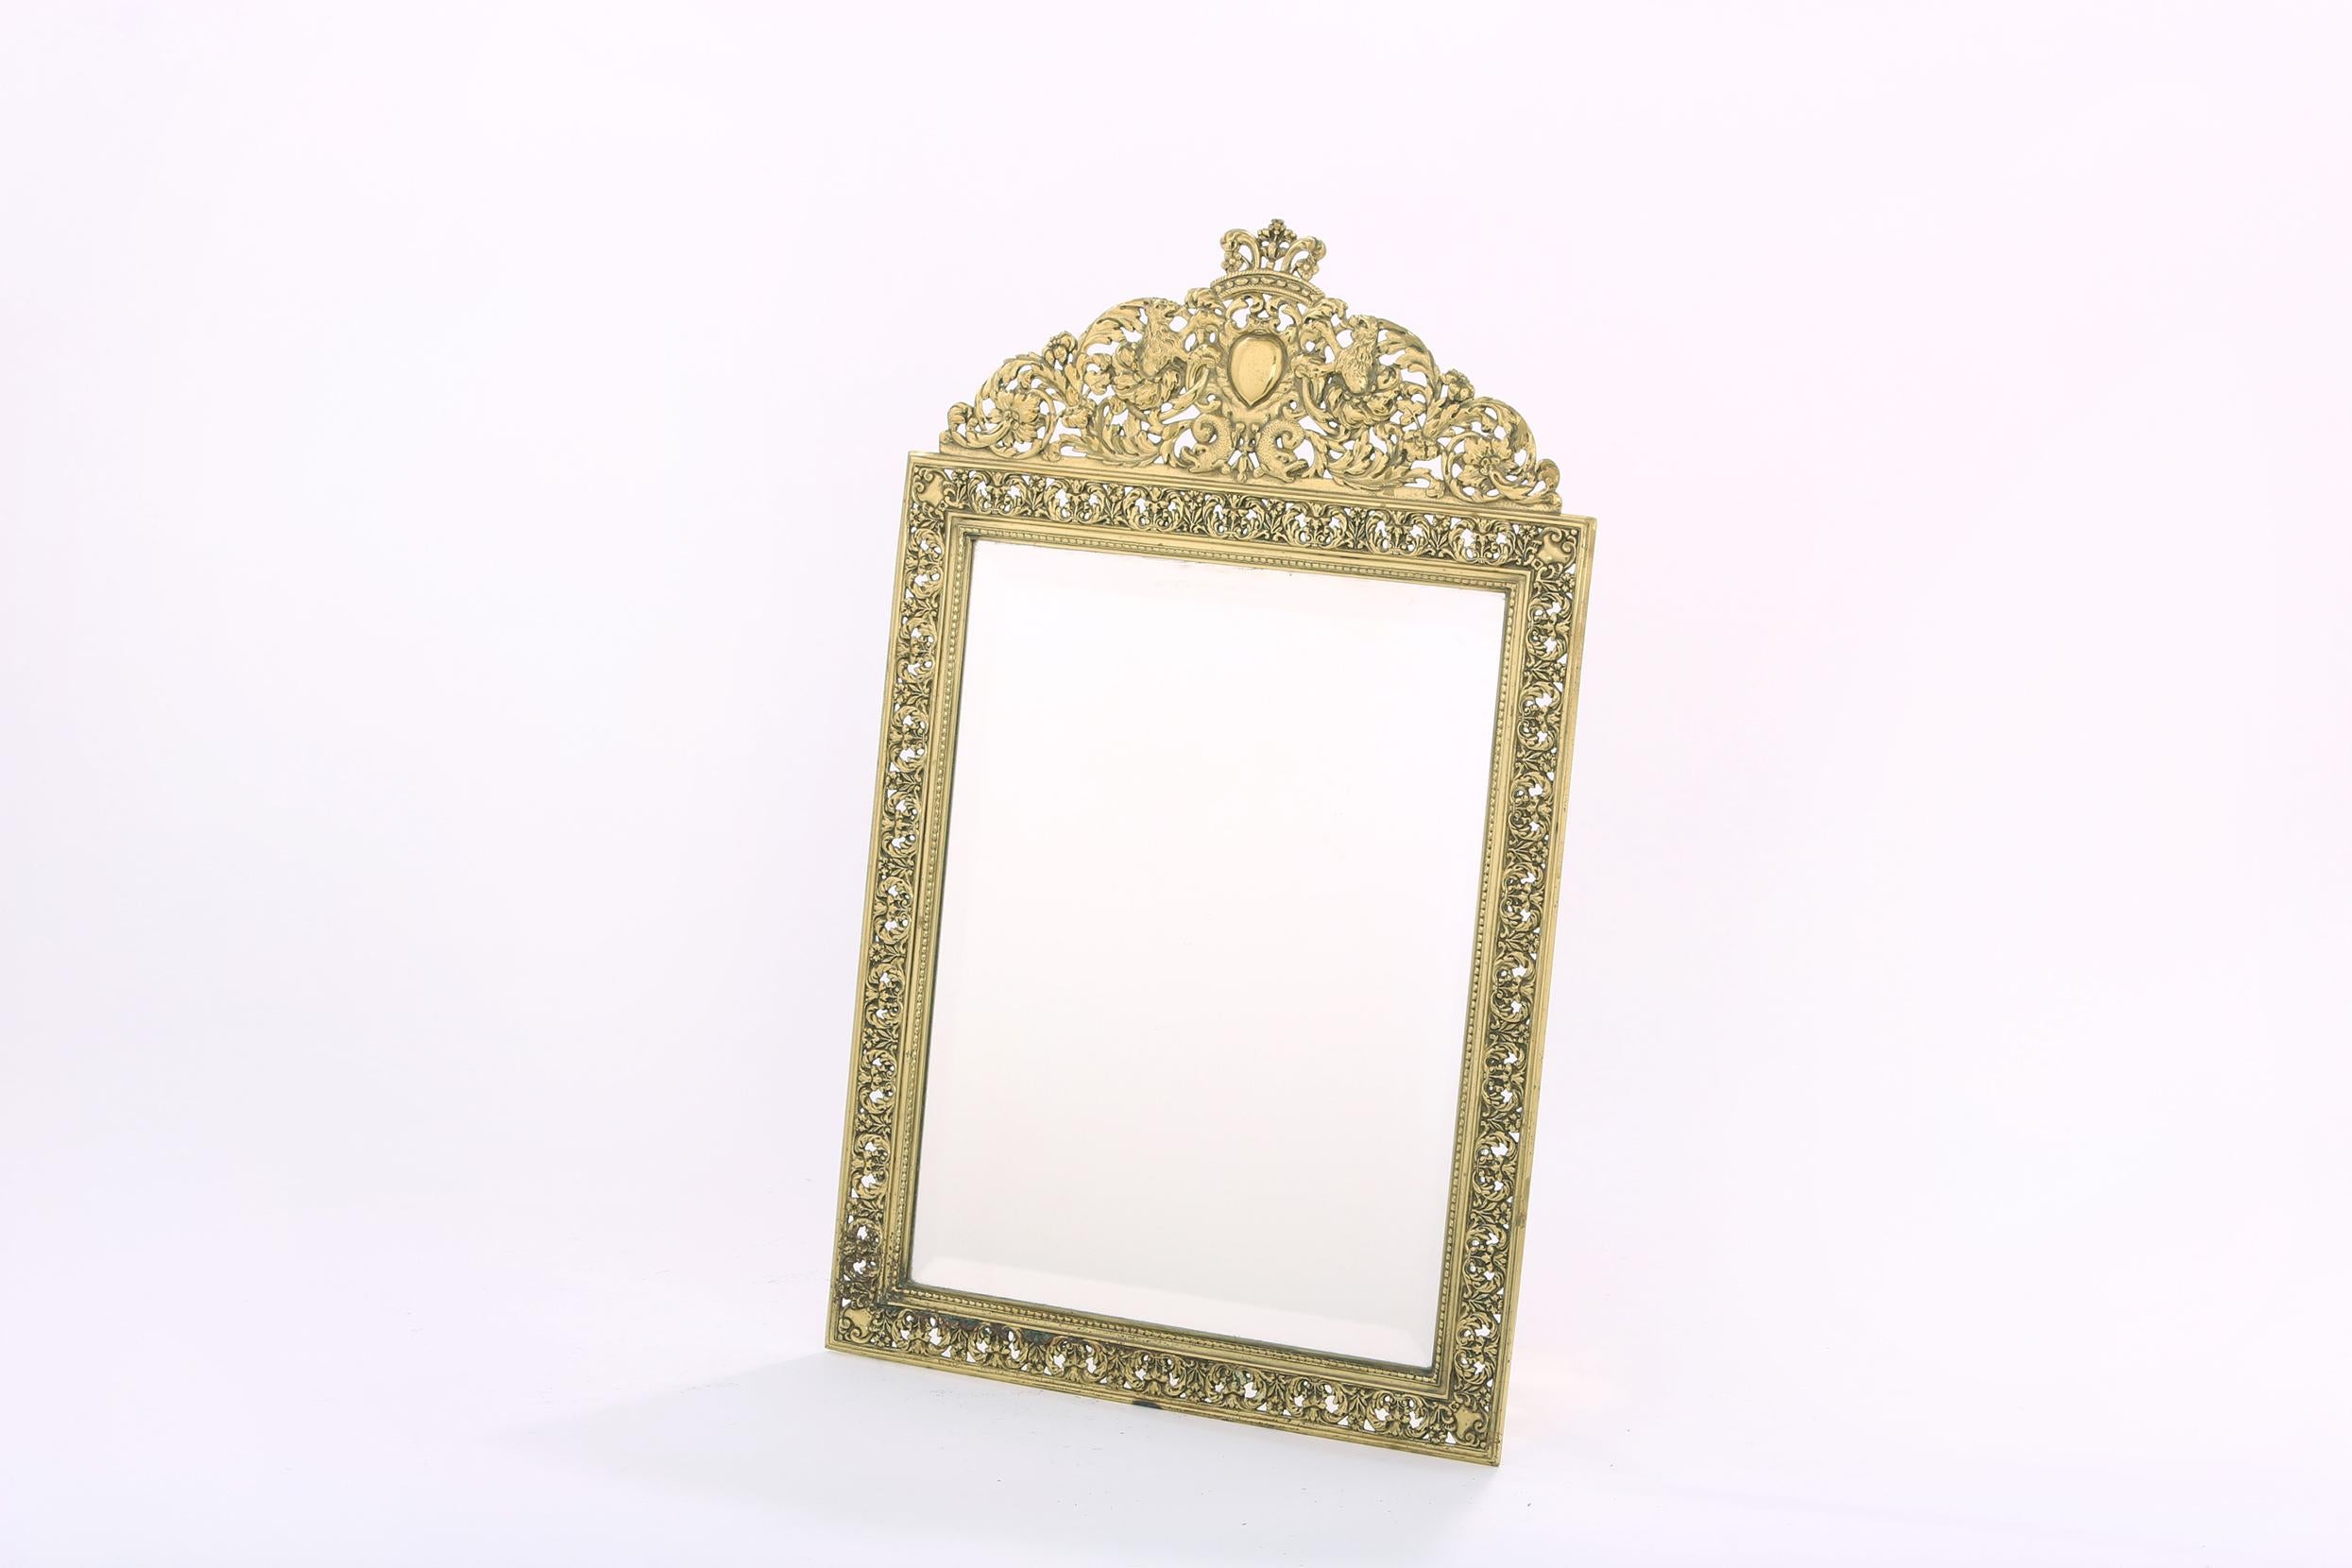 English gilt brass framed beveled vanity mirror with exterior design details. The mirror is in good condition. Minor wear appropriate with age / use. Maker's mark undersigned. The vanity mirror stand about 20.5 inches tall X 12.5 inches wide. The